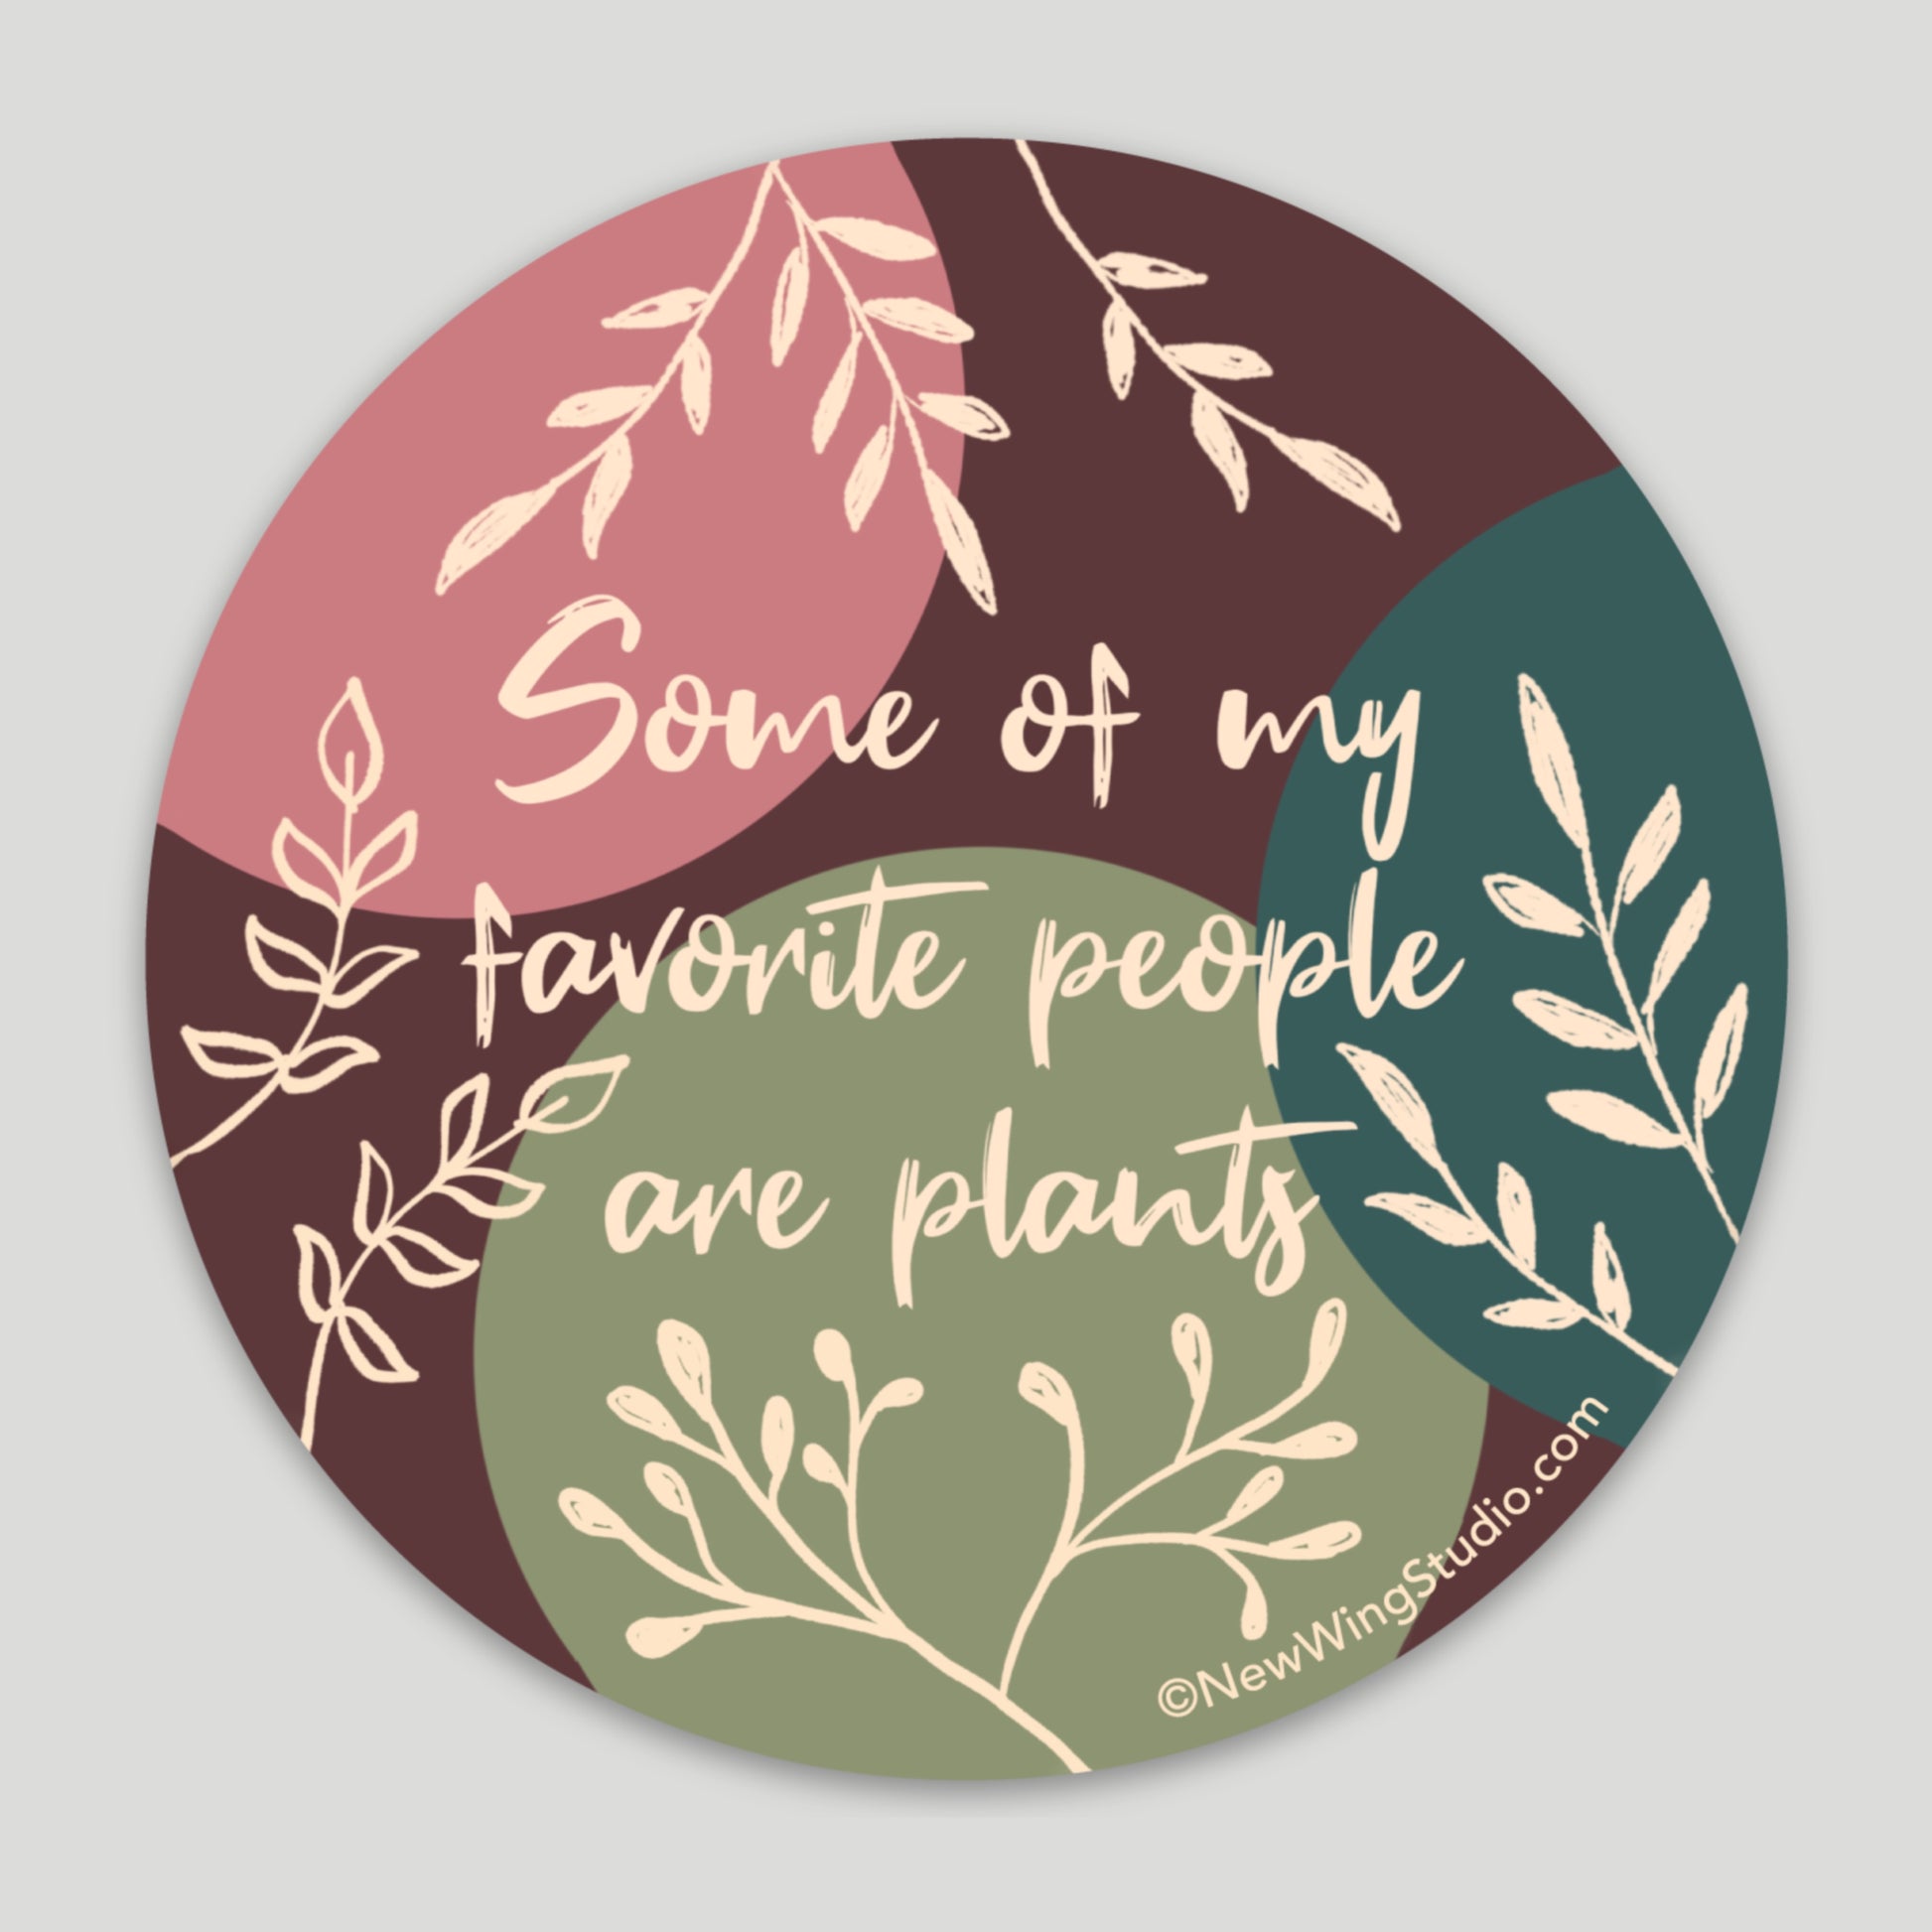 This is an image of New Wing Studio's sticker, "Some of My Favorite People are Plants."  It features beautiful pink, teal, green, and red/brown colors with cream leaf designs and the text, "Some of my favorite people are plants."  The sticker is perfect for those who love plants, those who love to garden, those who love flowers, or growing anything botanical.  It is also great for those who have house plants.  Newwingstudio.com 